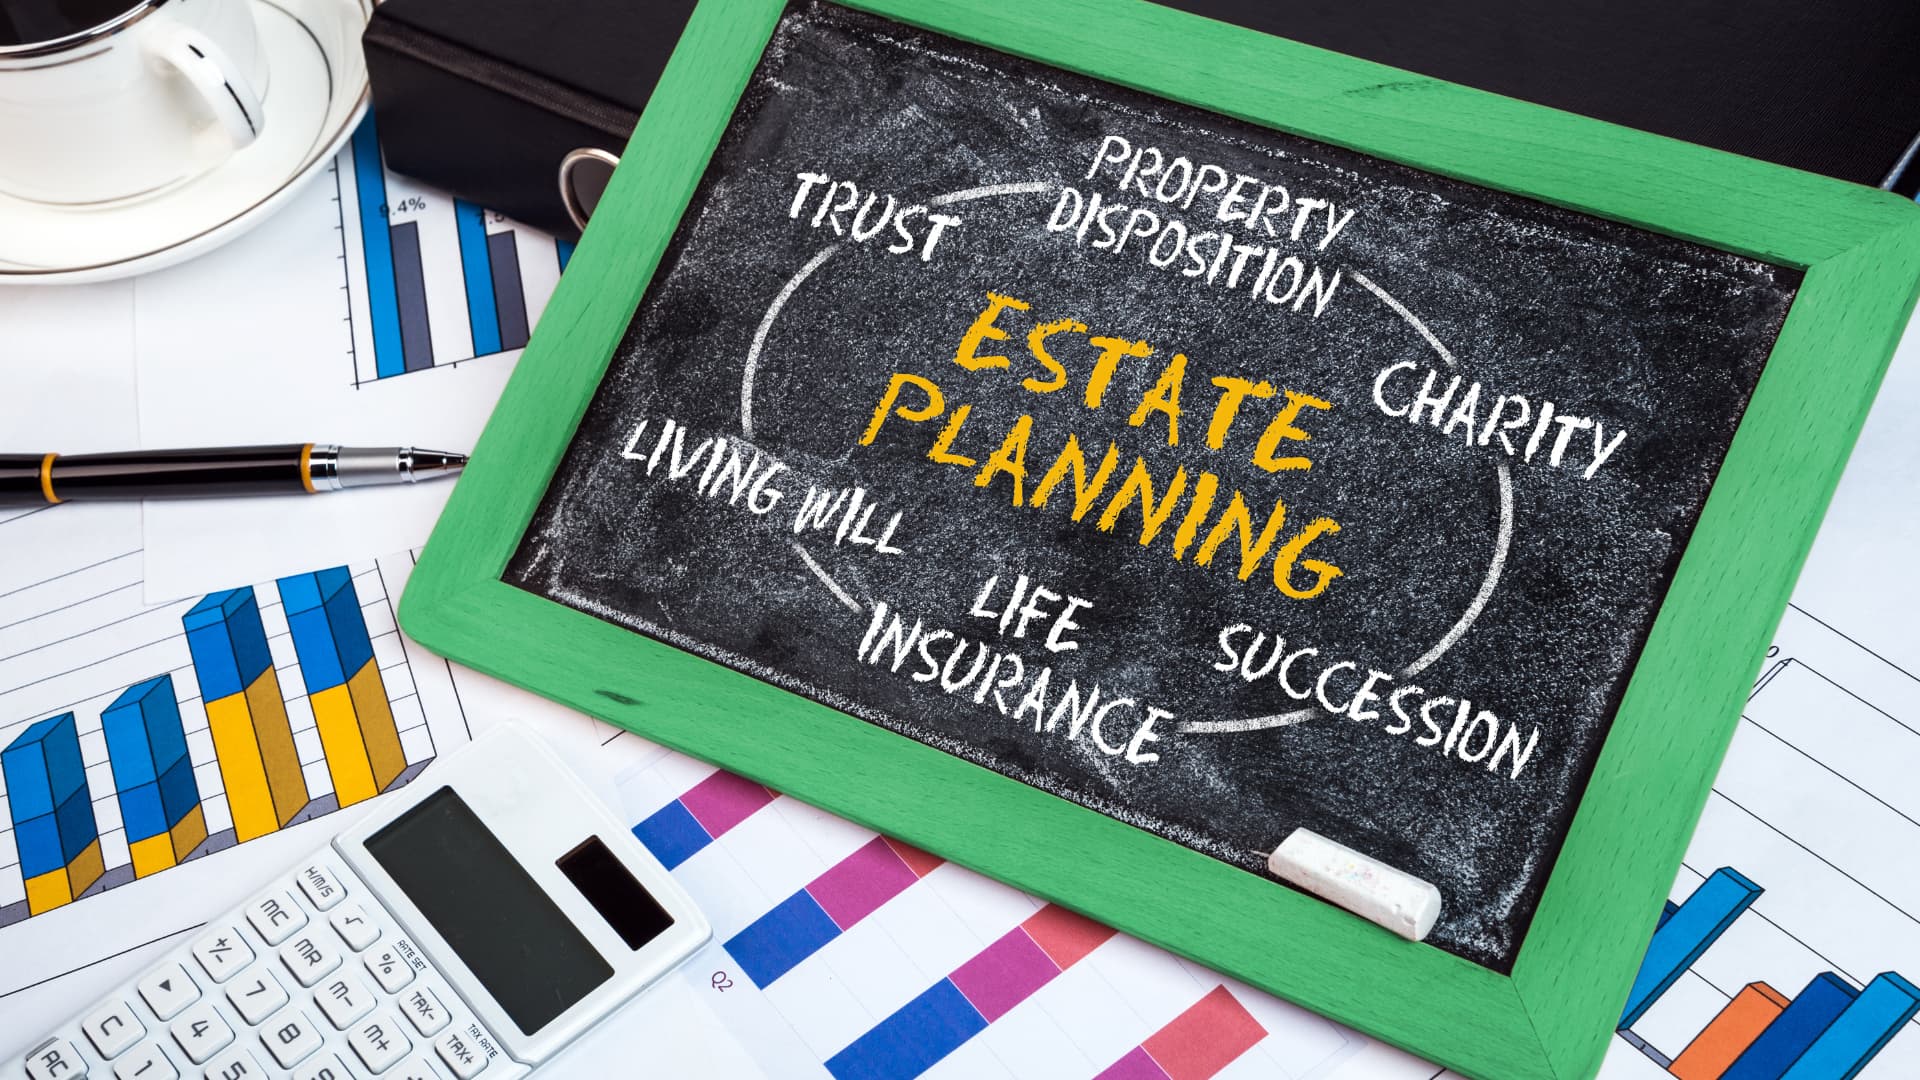 An image of estate planning on a blackboard with important considerations for Florida Estate Planning Checklist